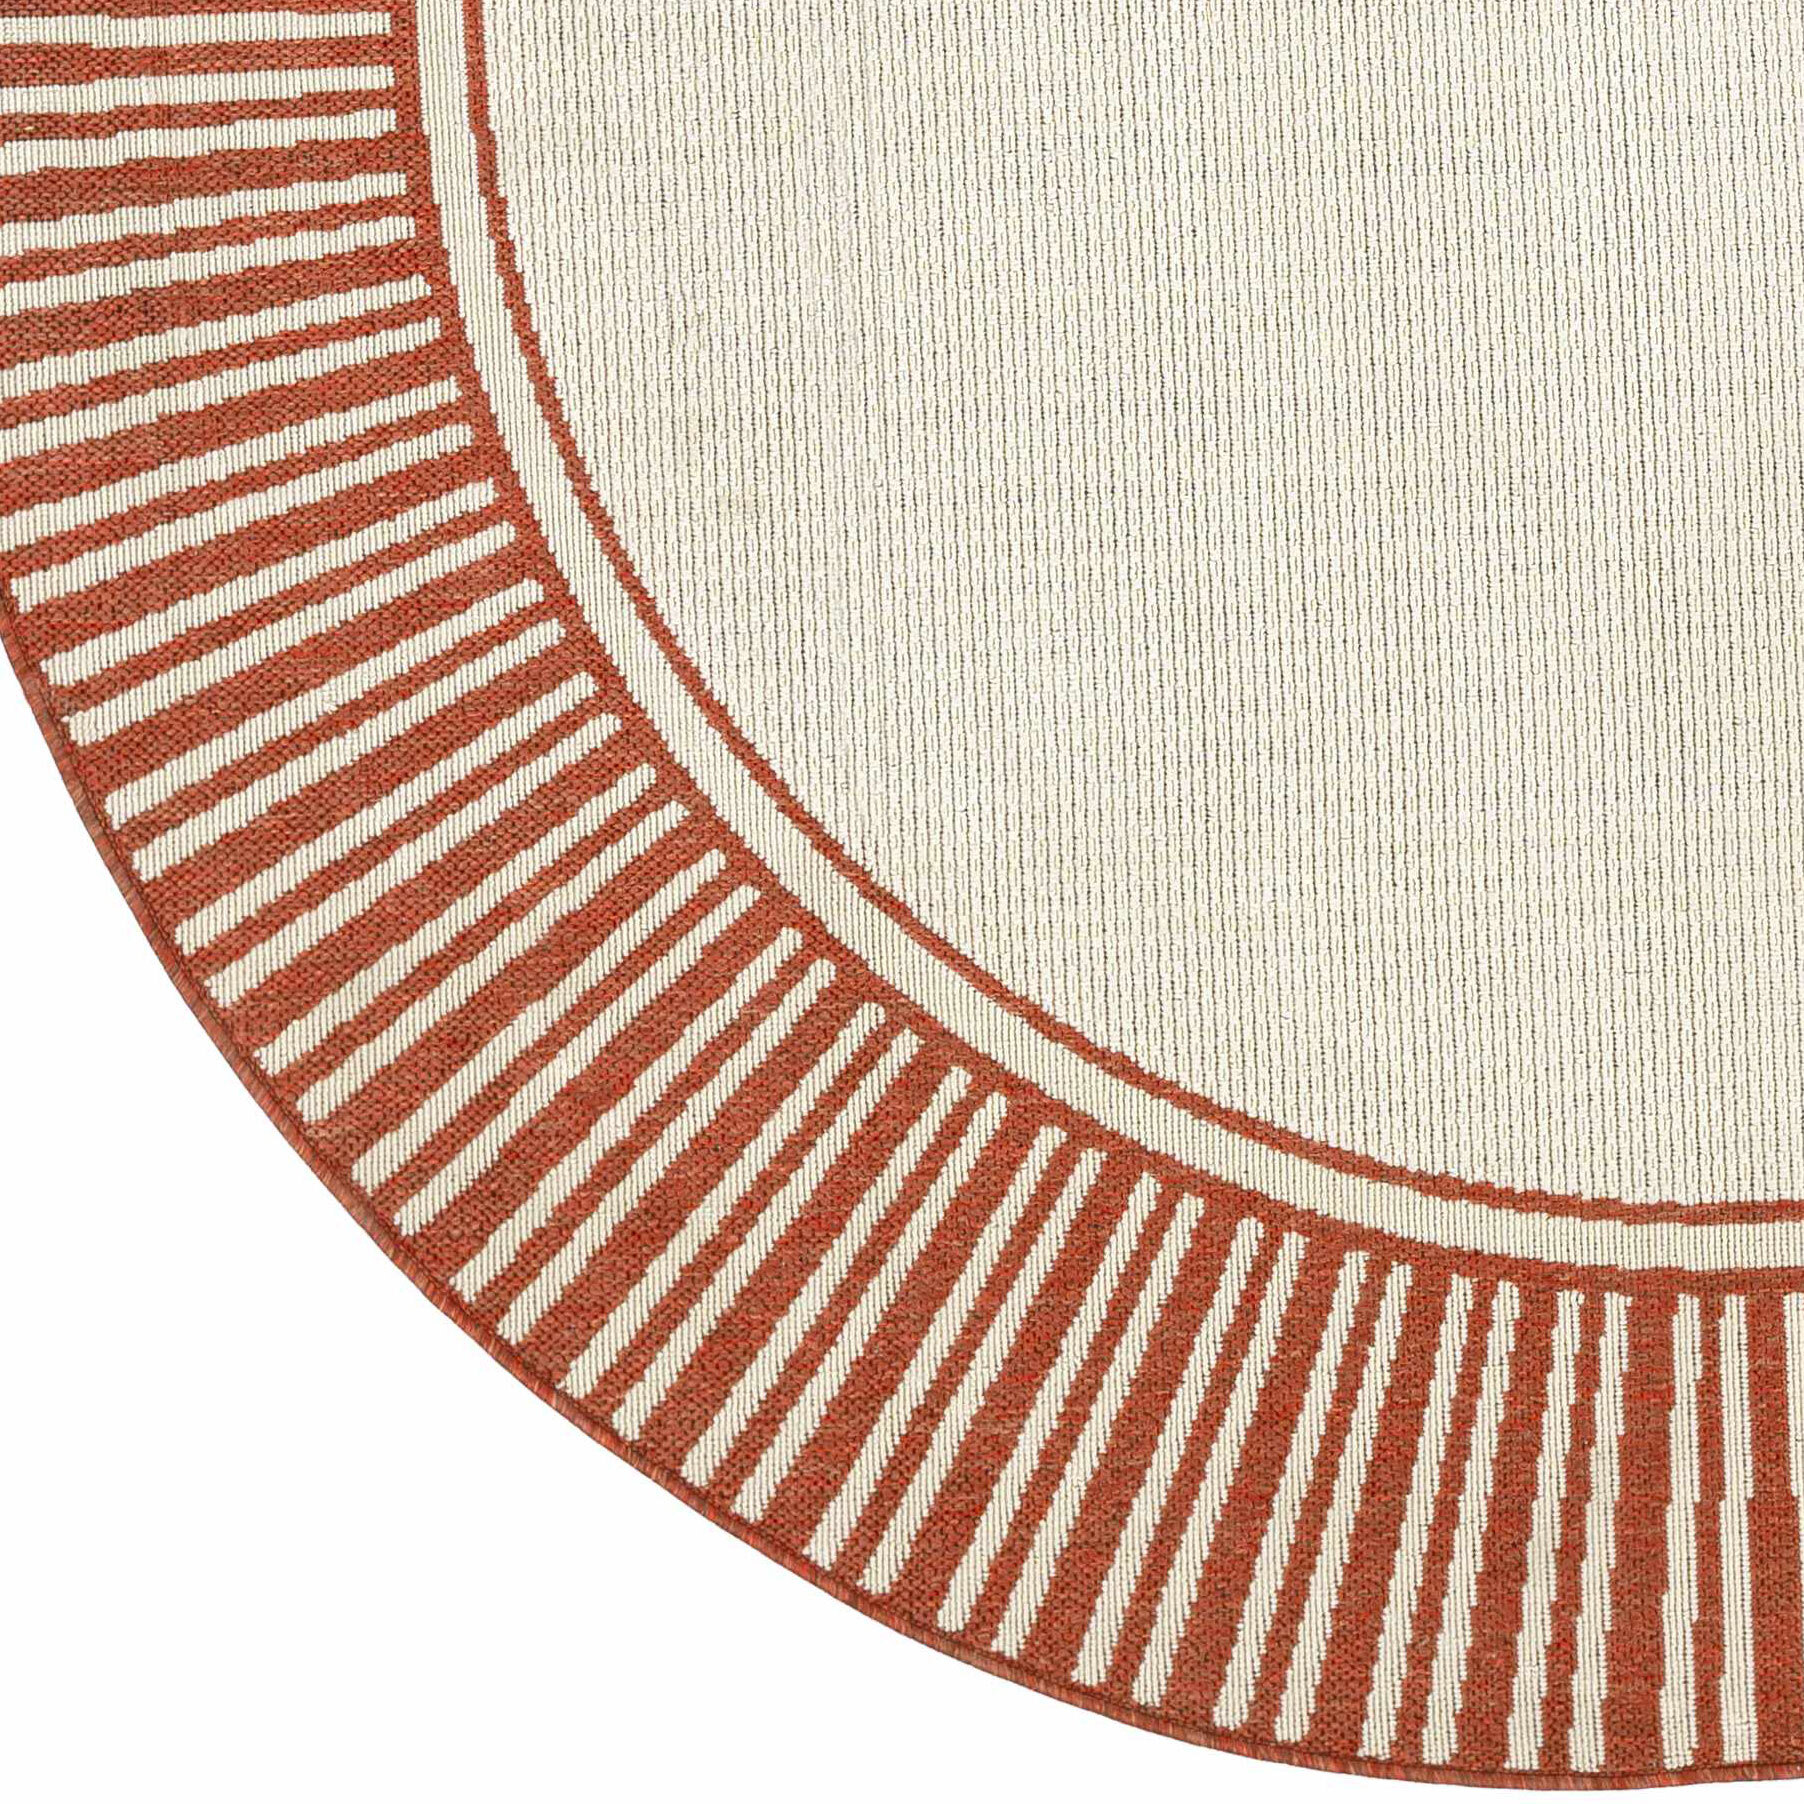 Ambient Round Rug AO4808-C